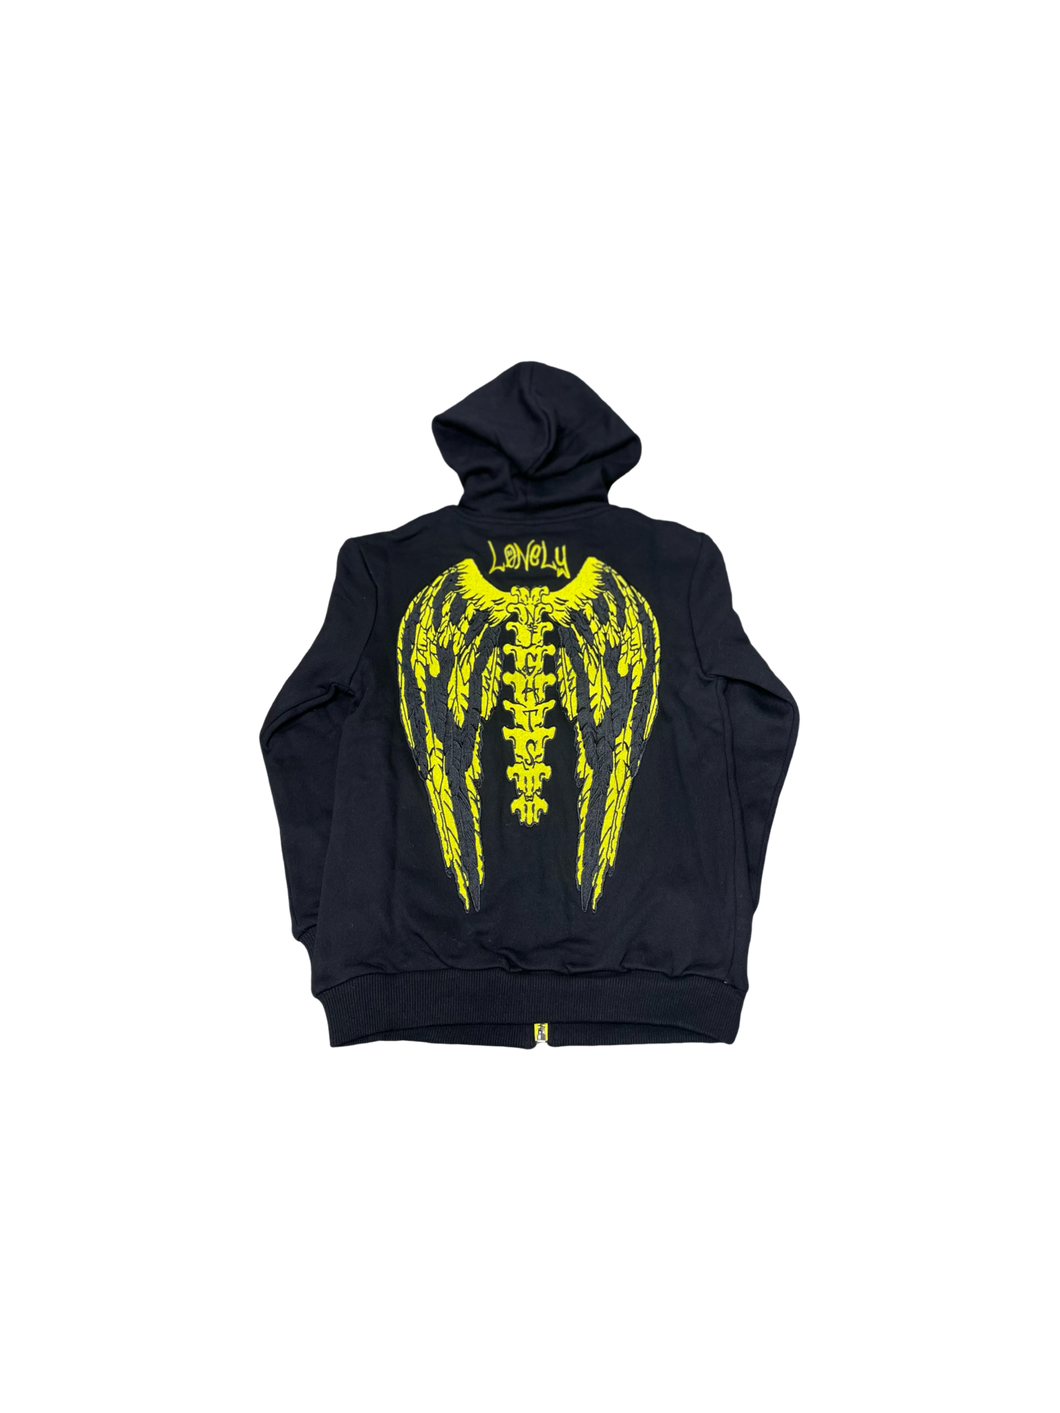 Lonelynights black and yellow kids sweatsuit